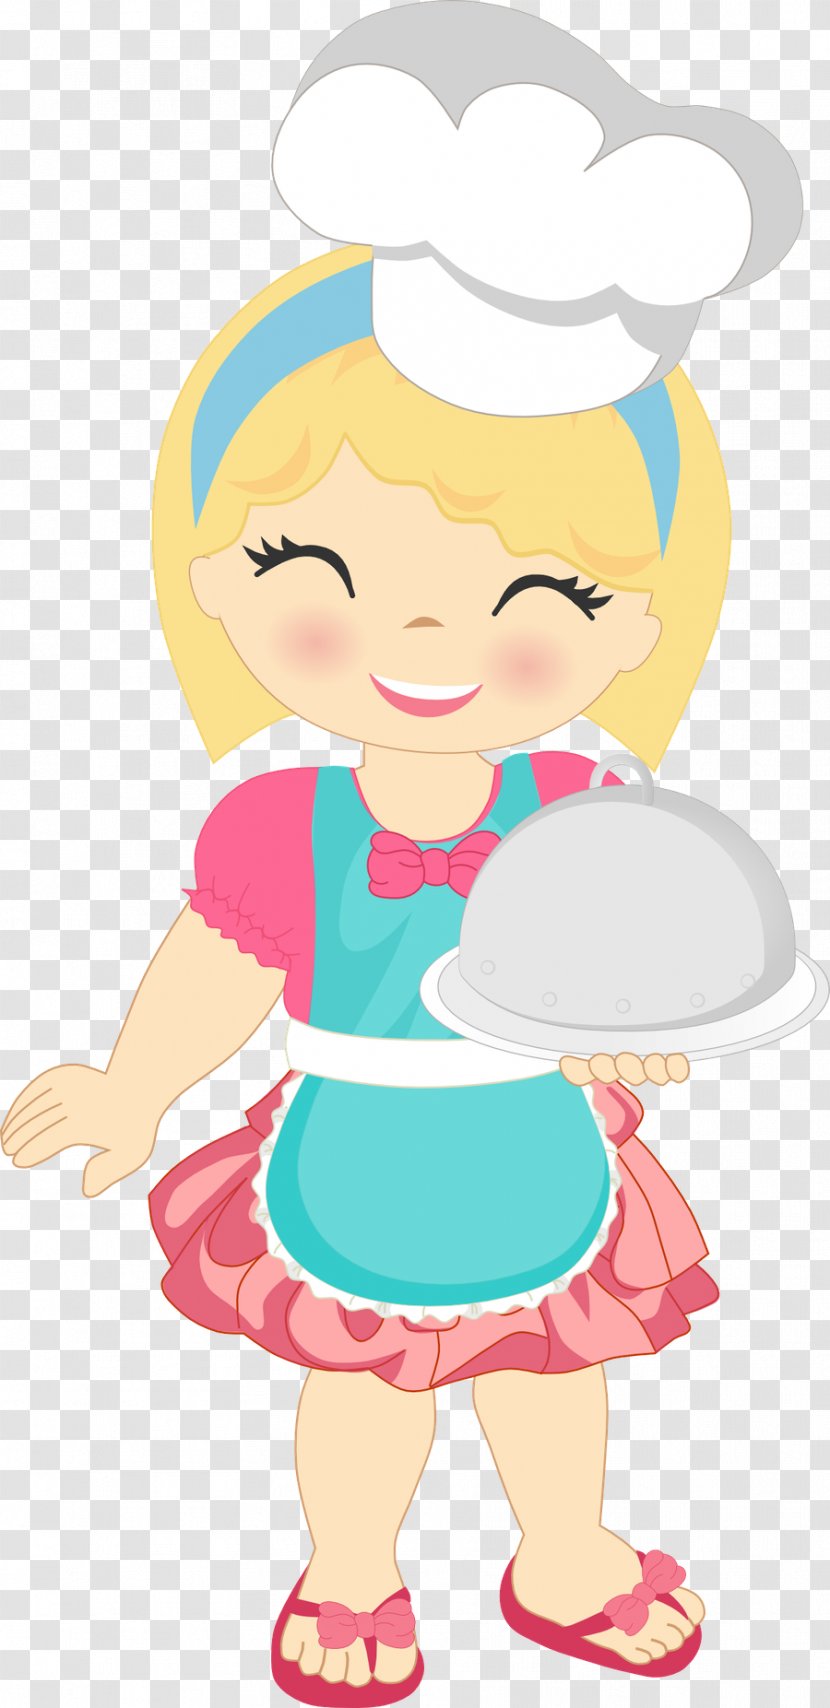 Kitchen Chef Cook Clip Art Drawing - Watercolor - Bakery Transparent PNG